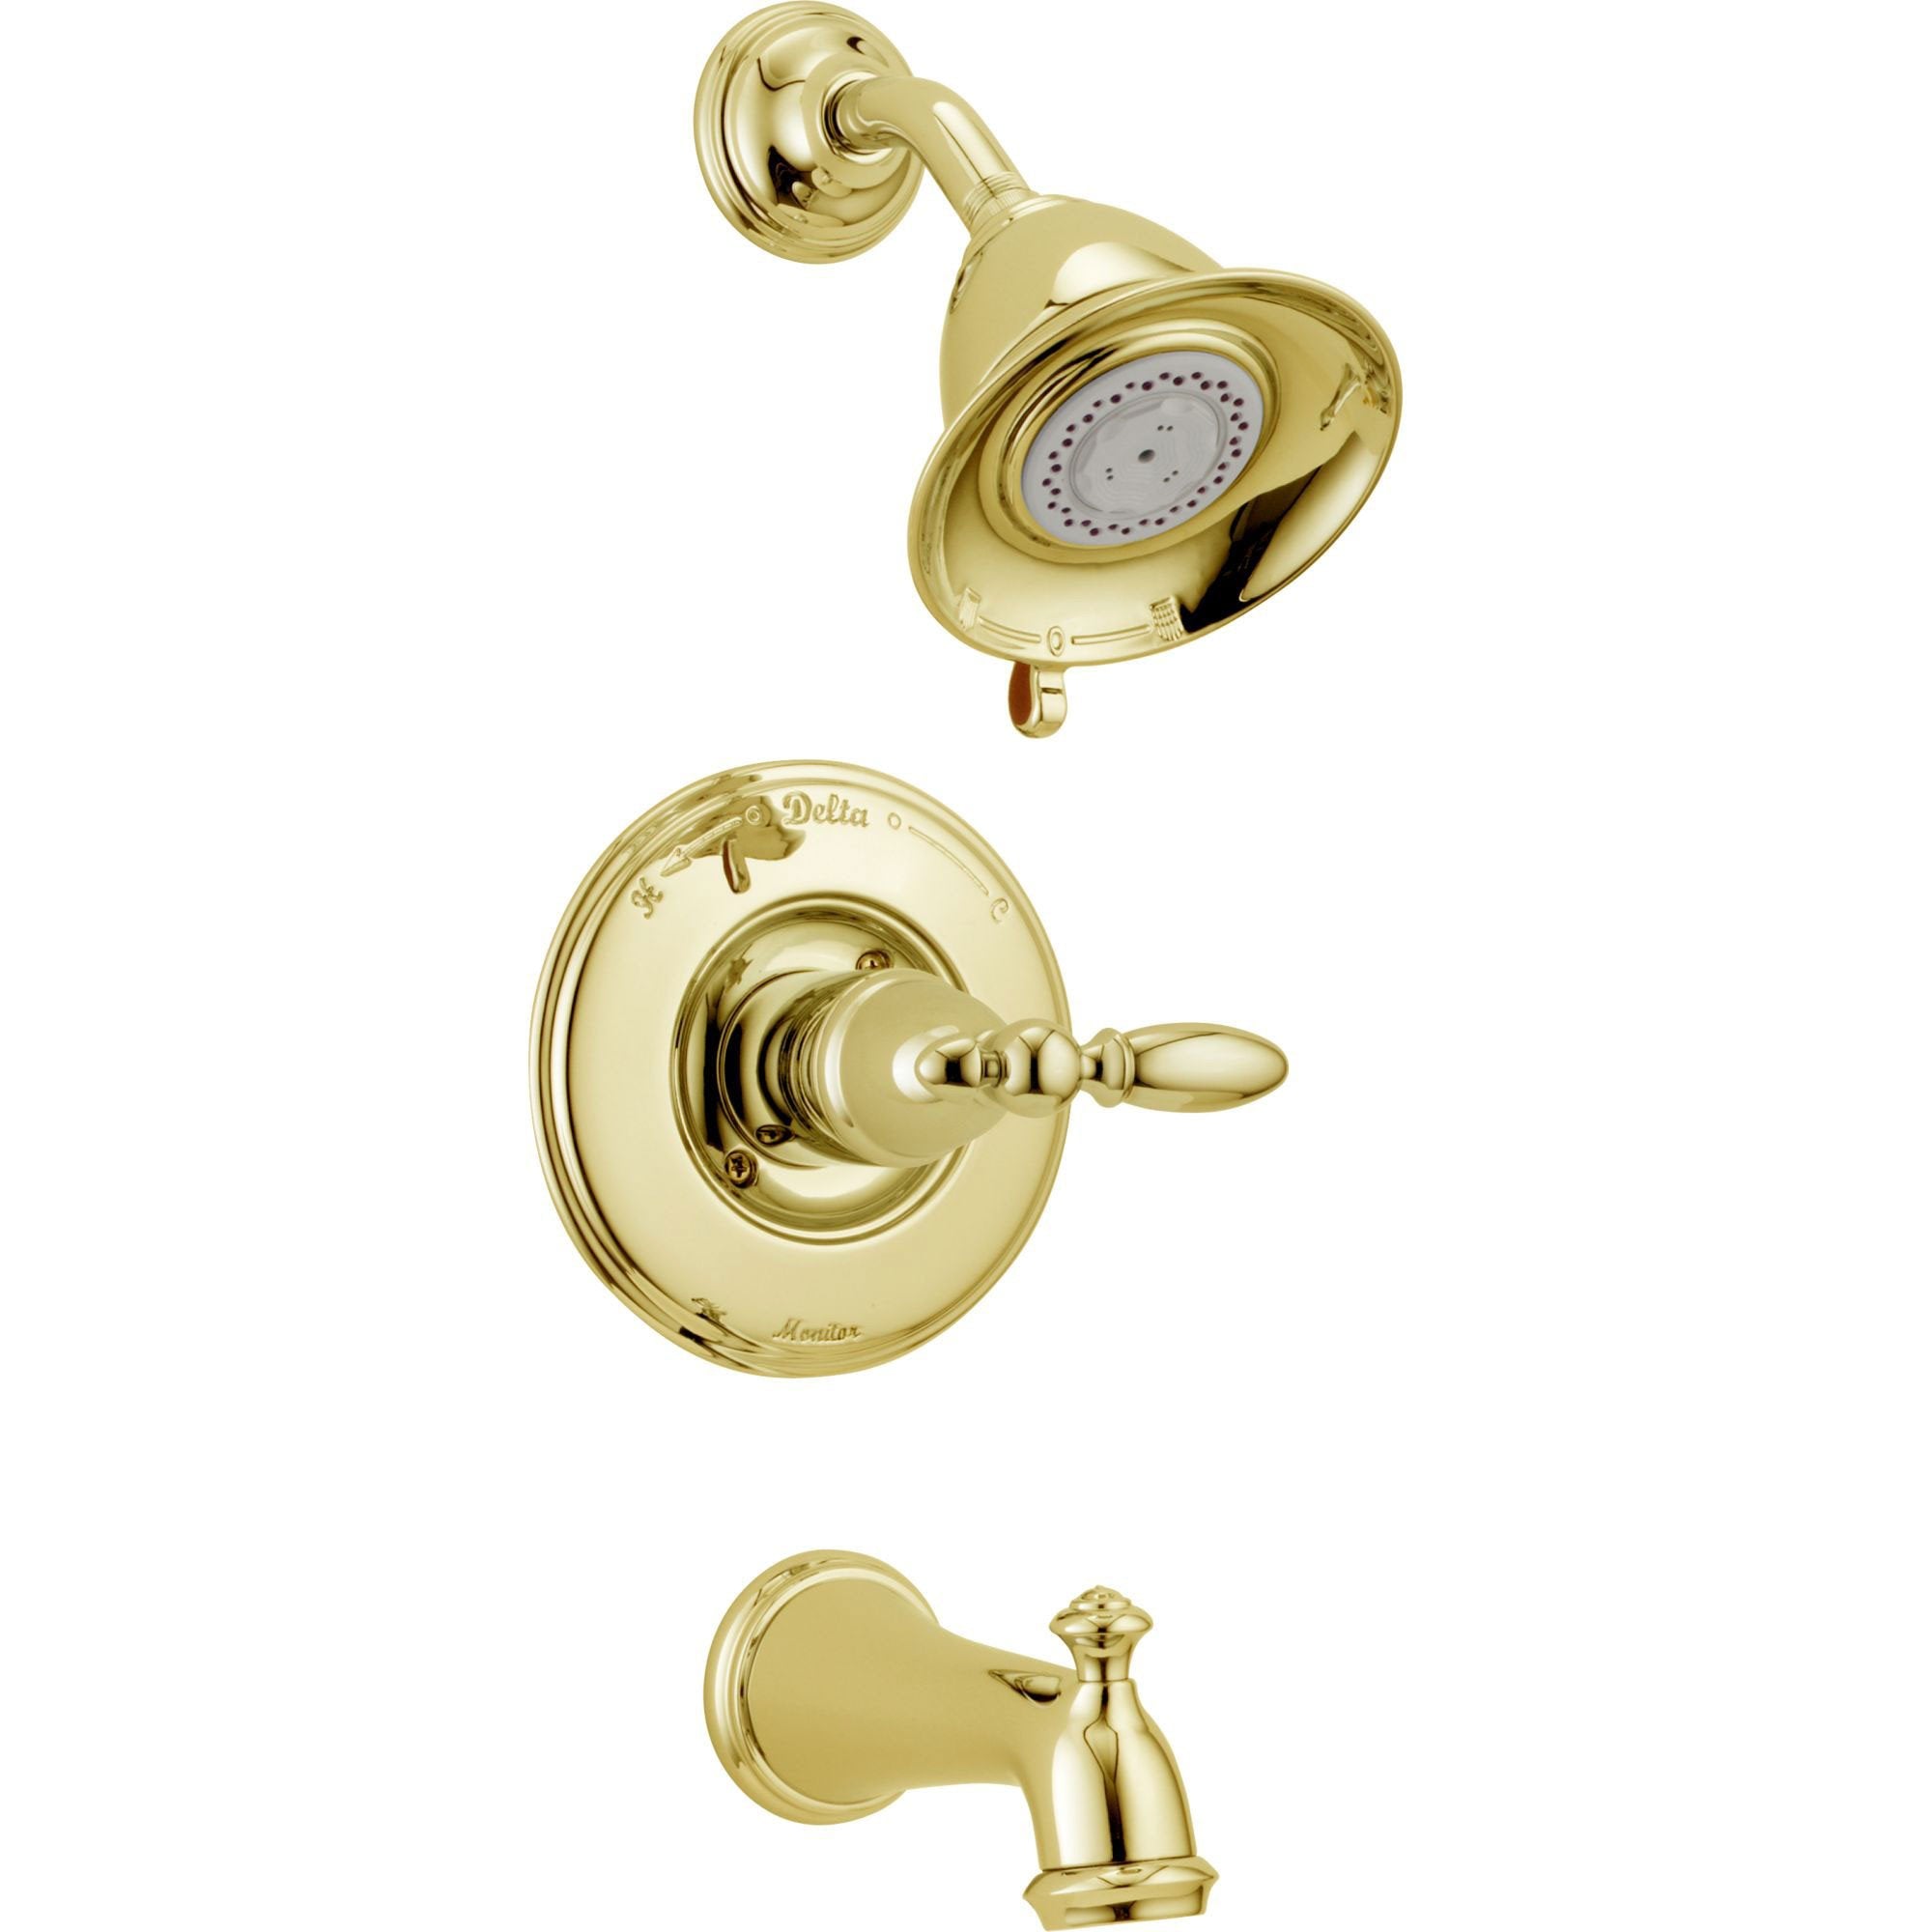 Delta Traditional Victorian Polished Brass Finish 14 Series Tub and Shower Faucet Combo INCLUDES Rough-in Valve with Stops and Single Lever Handle D1187V